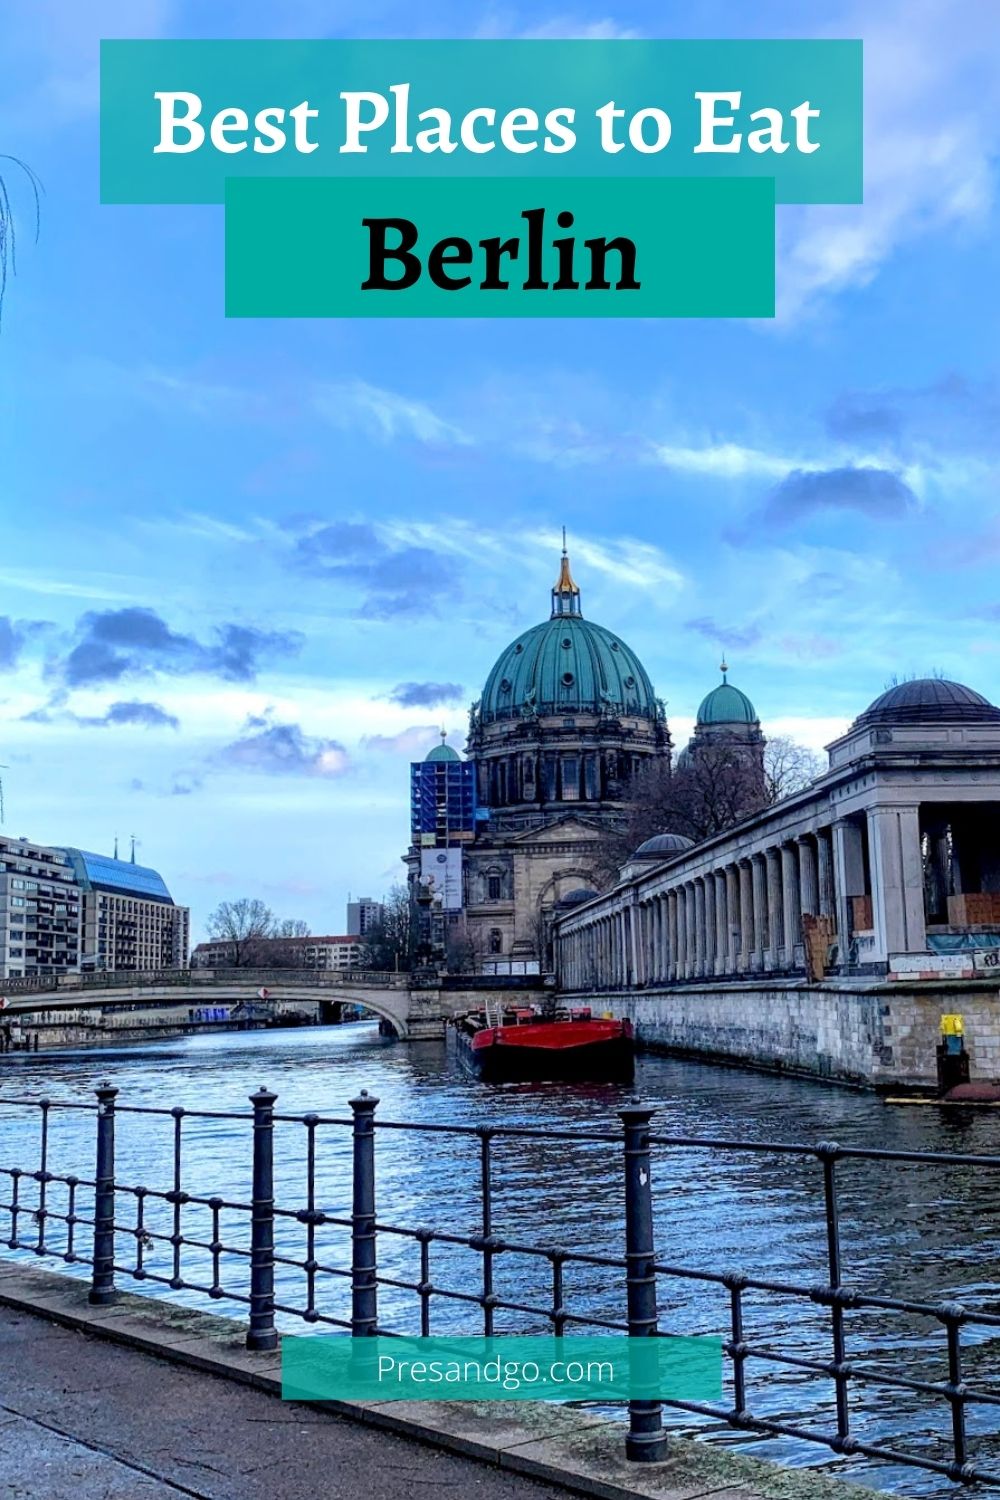 Best places to eat Berlin is the titles and the photo has the Berlin Cathedral with a canal in front